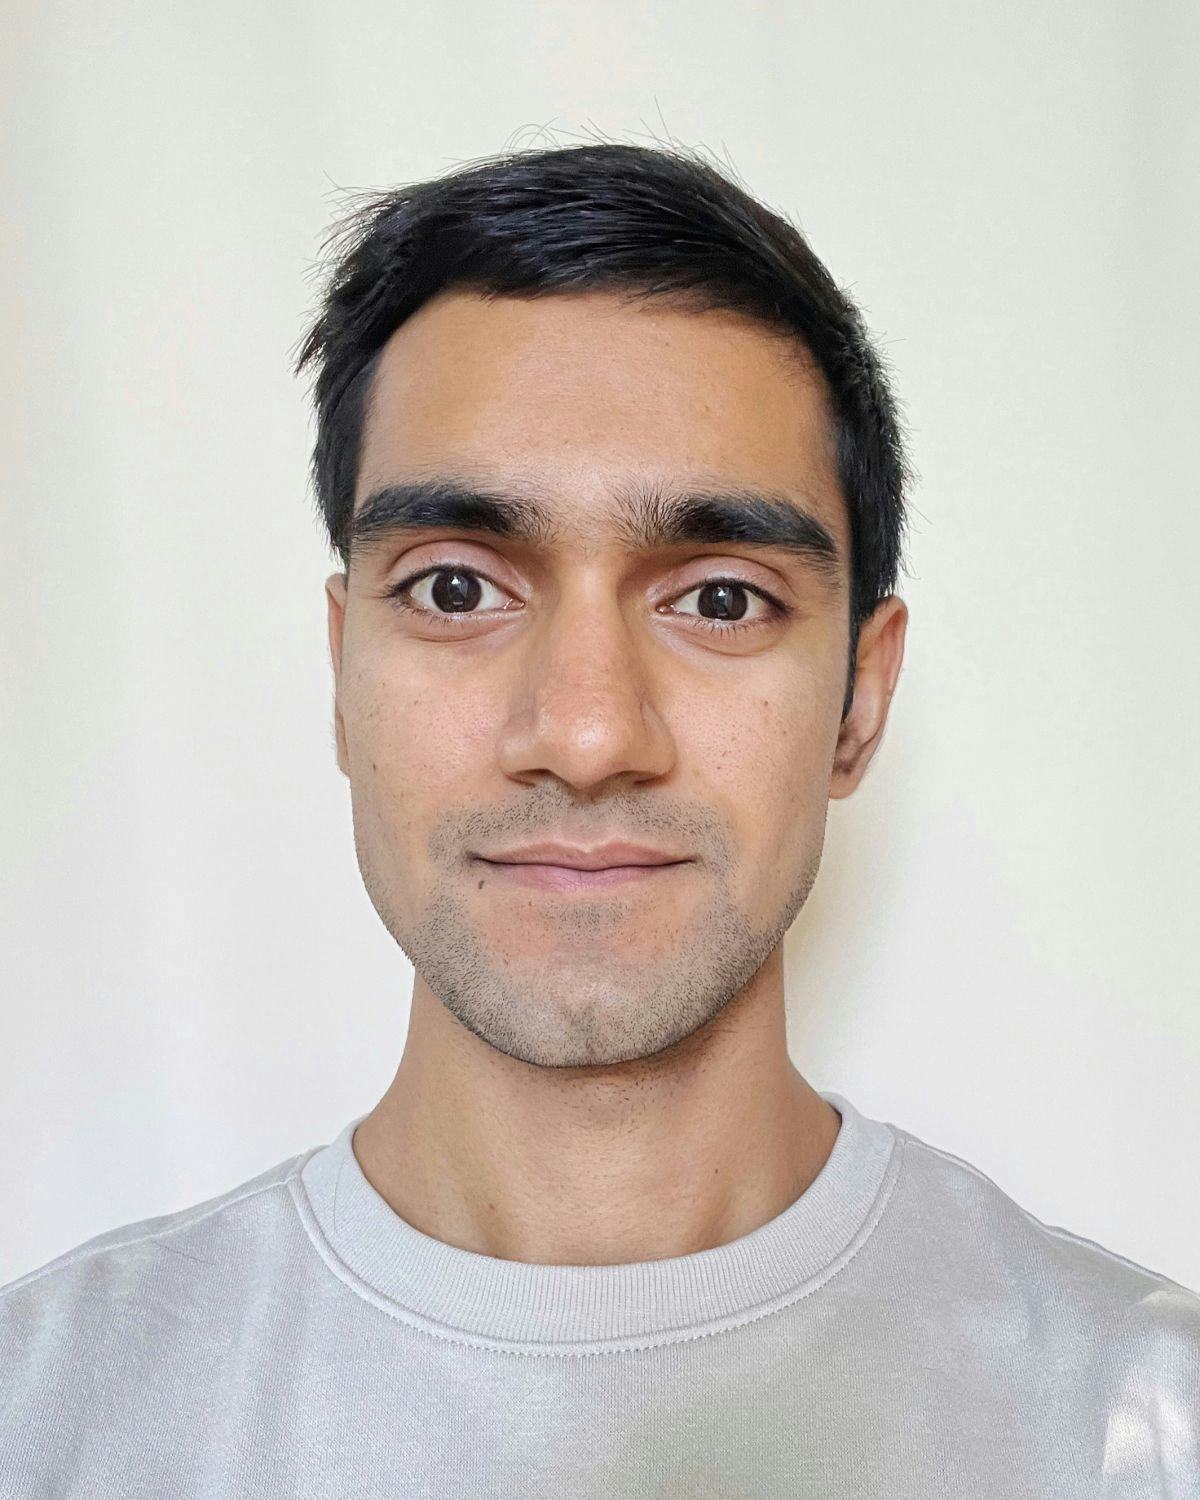 Photo of Apoorv Chandrakar, a second-year master’s student in computer science